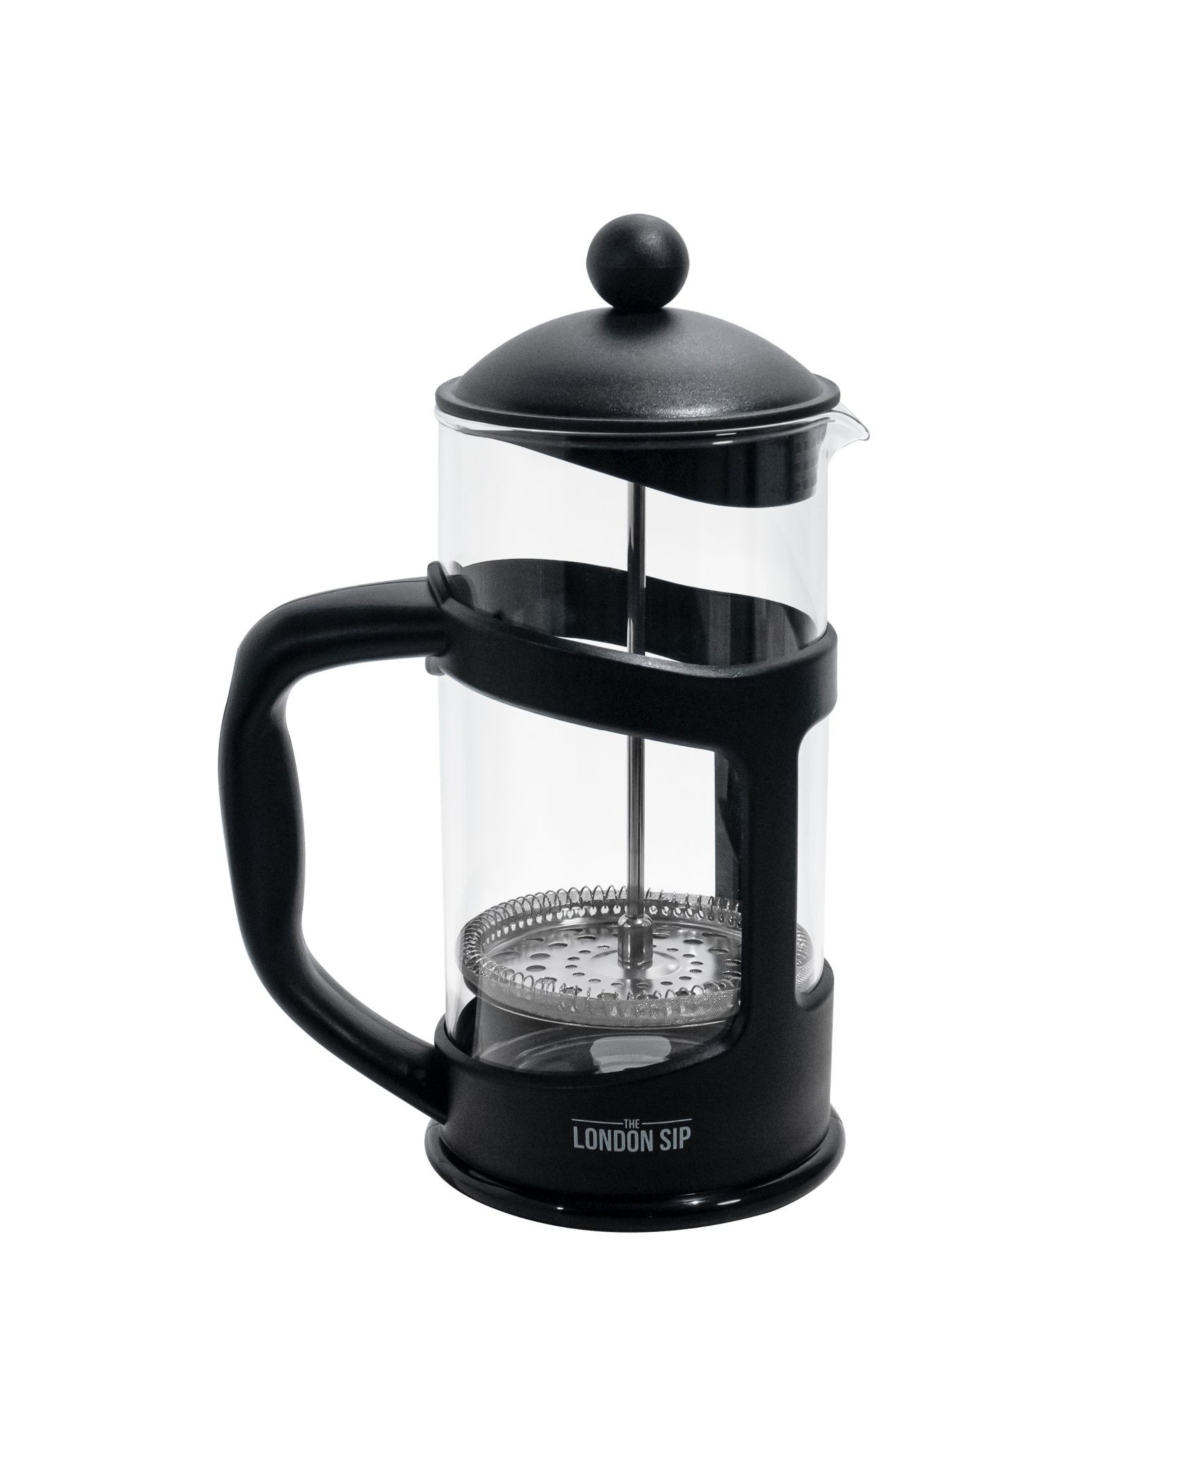 London Sip Deluxe French Press Immersion Brewer, 1000ml In Black